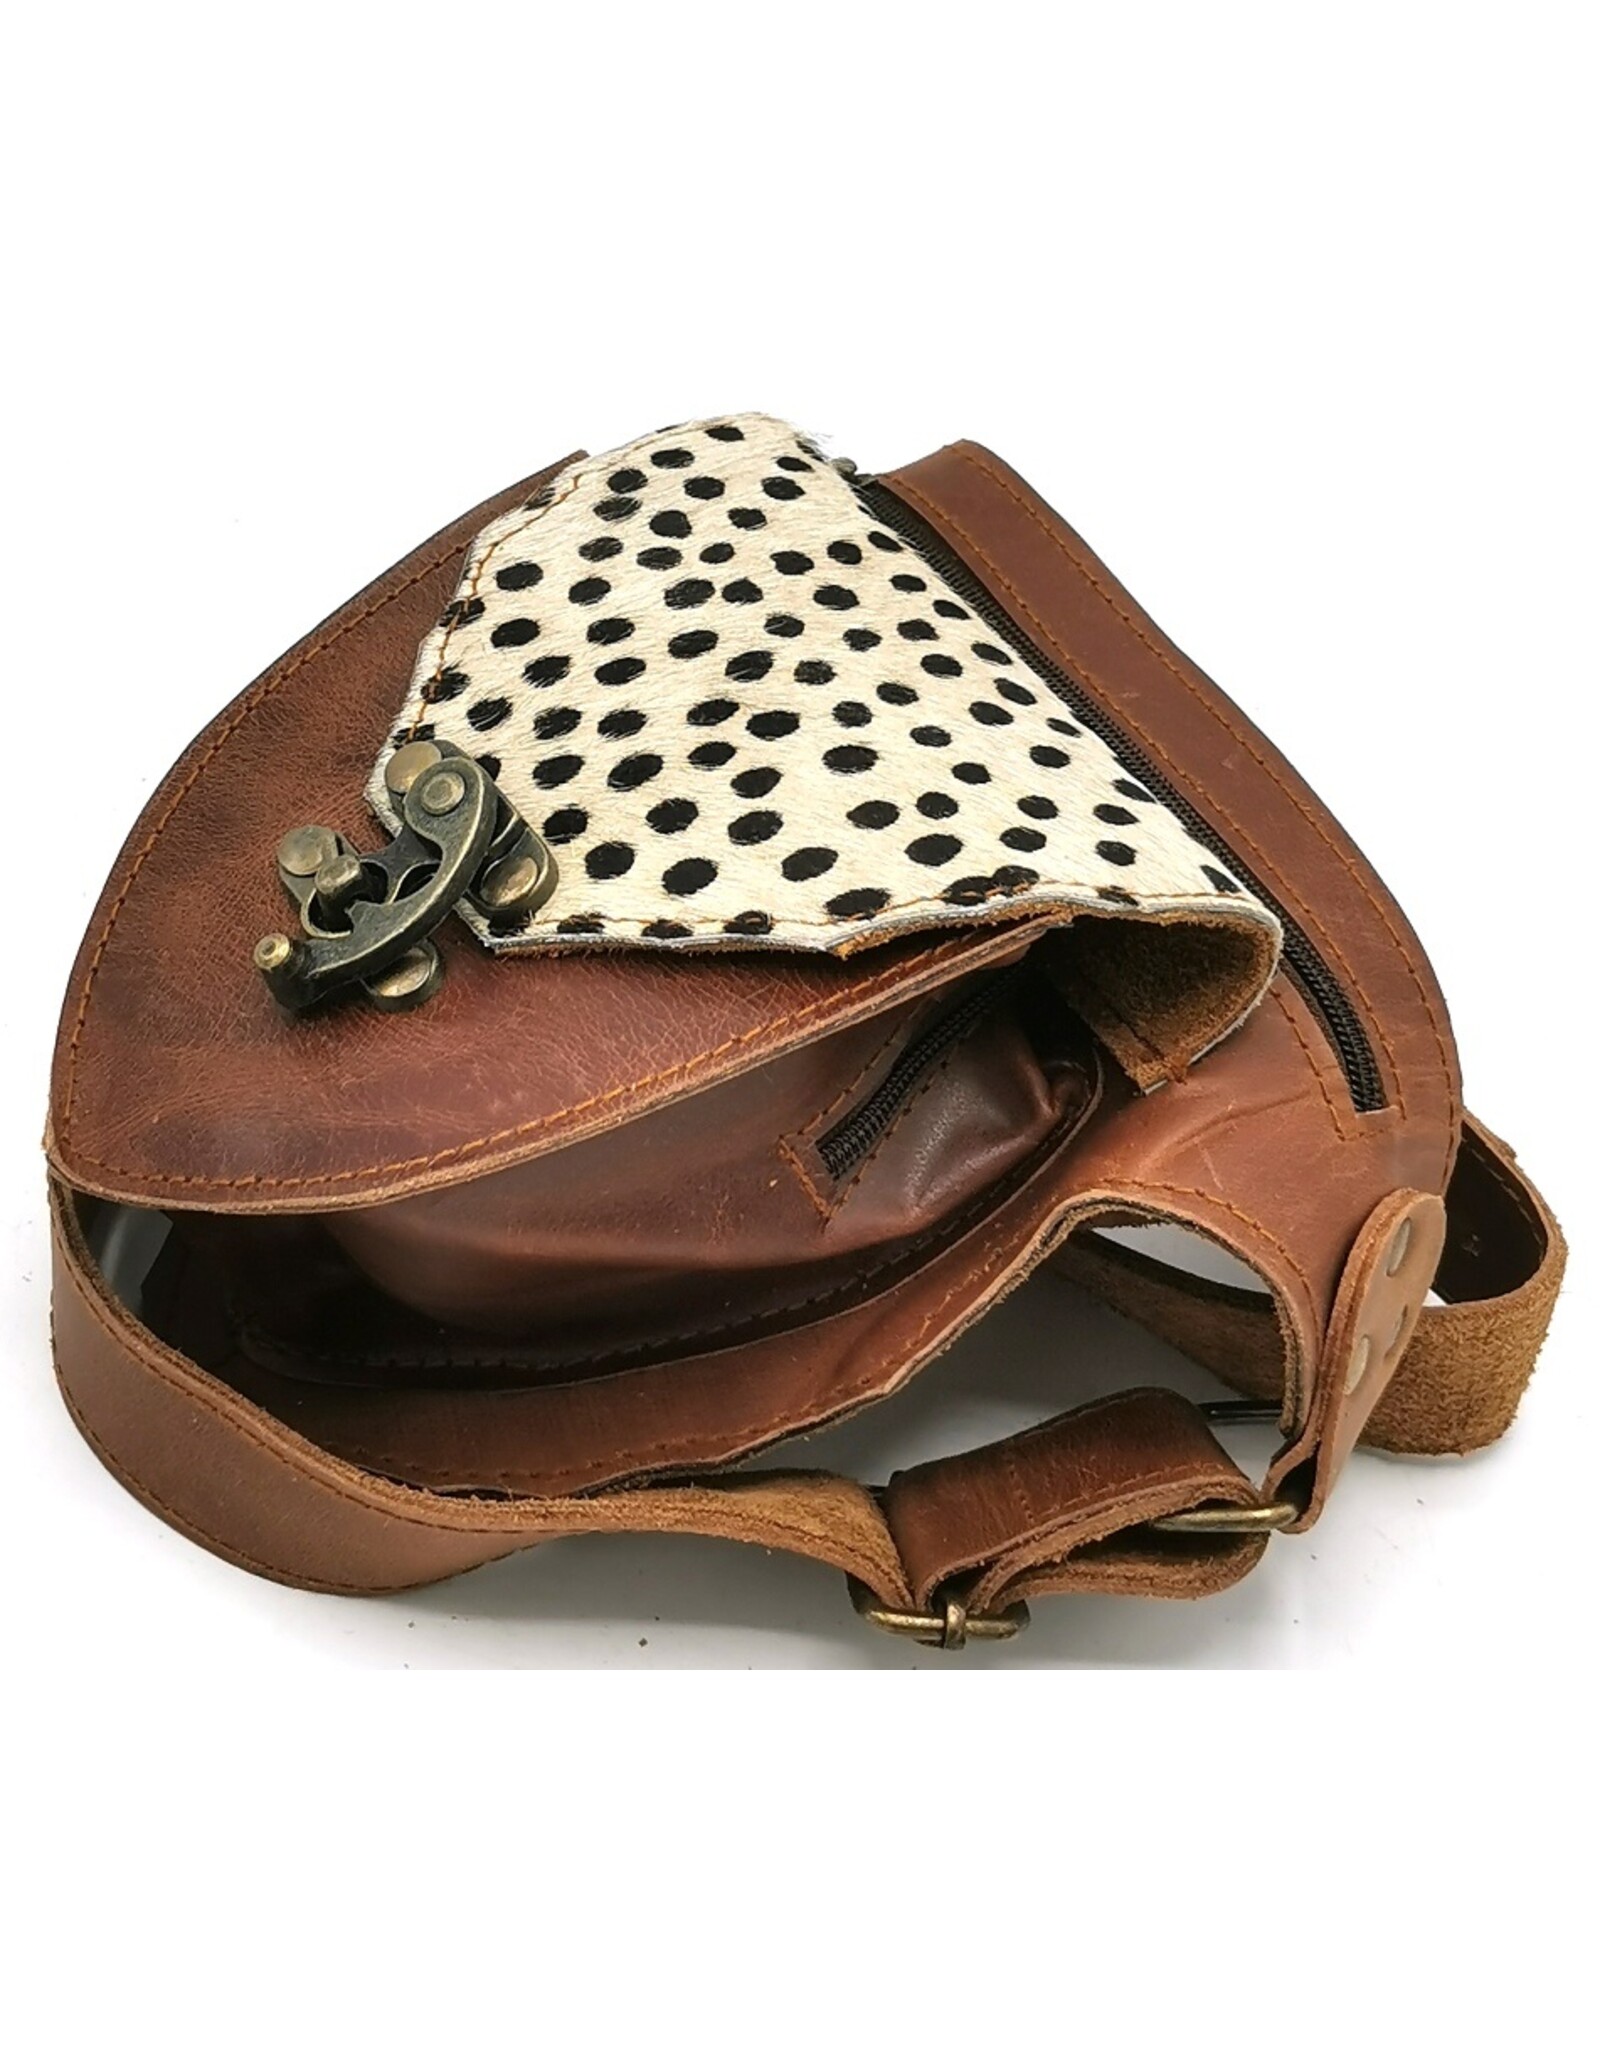 Trukado Leather Festival bags, waist bags and belt bags - Cowhide waist bag with Animal print and hook cognac